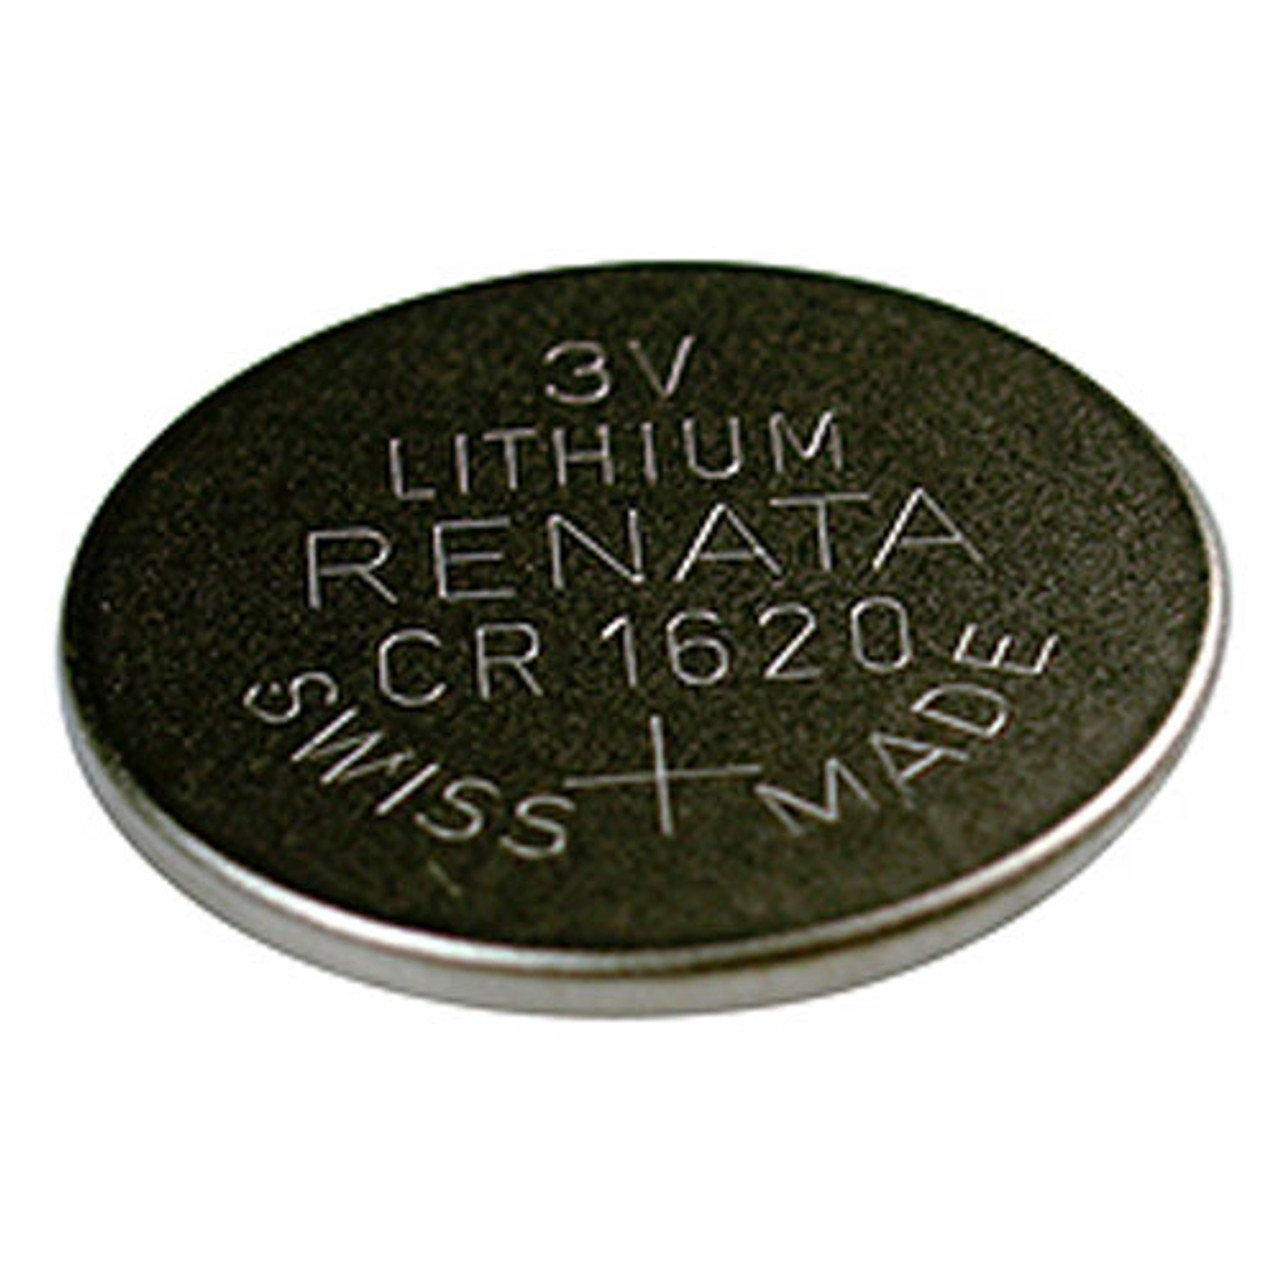 Install Bay® CR1620 - CR1620 3 V Lithium Coin Cell Batteries (5